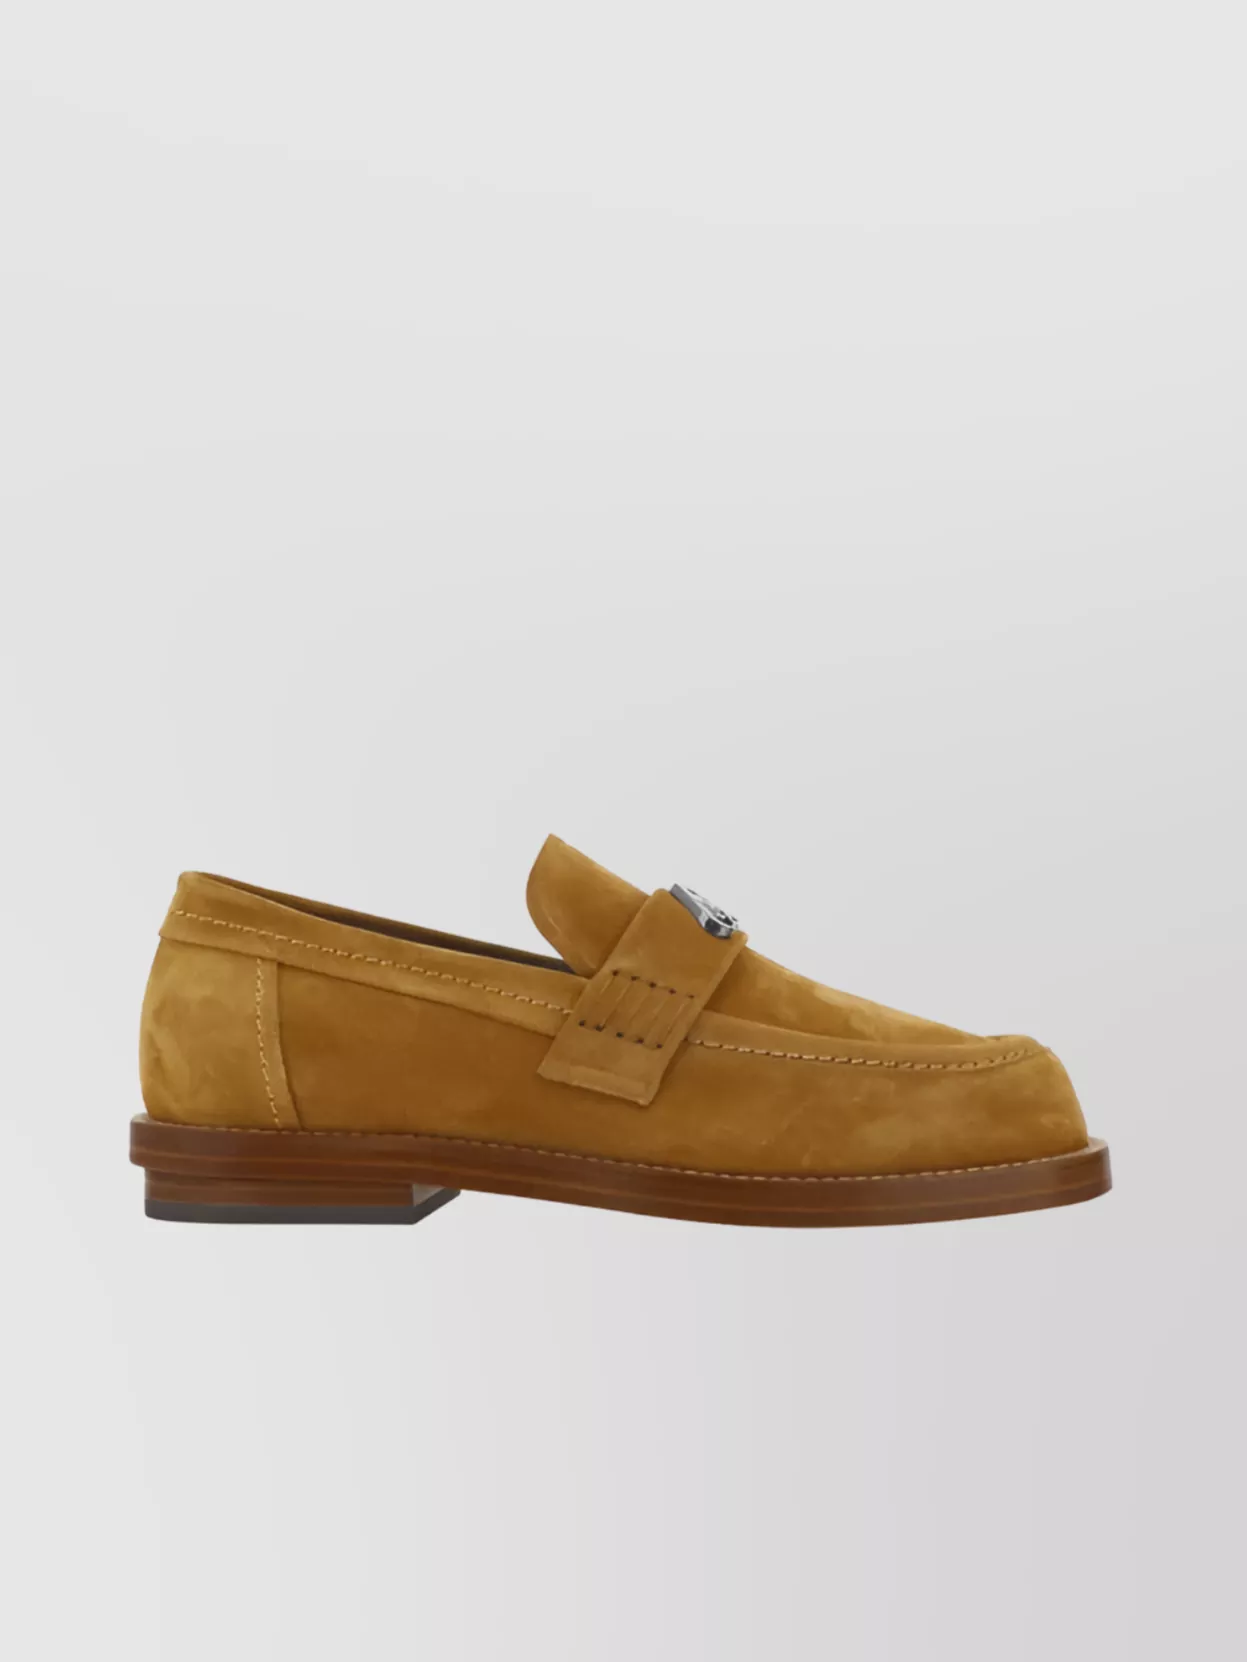 Alexander Mcqueen Calfskin Leather Loafers Moc Toe Penny Strap